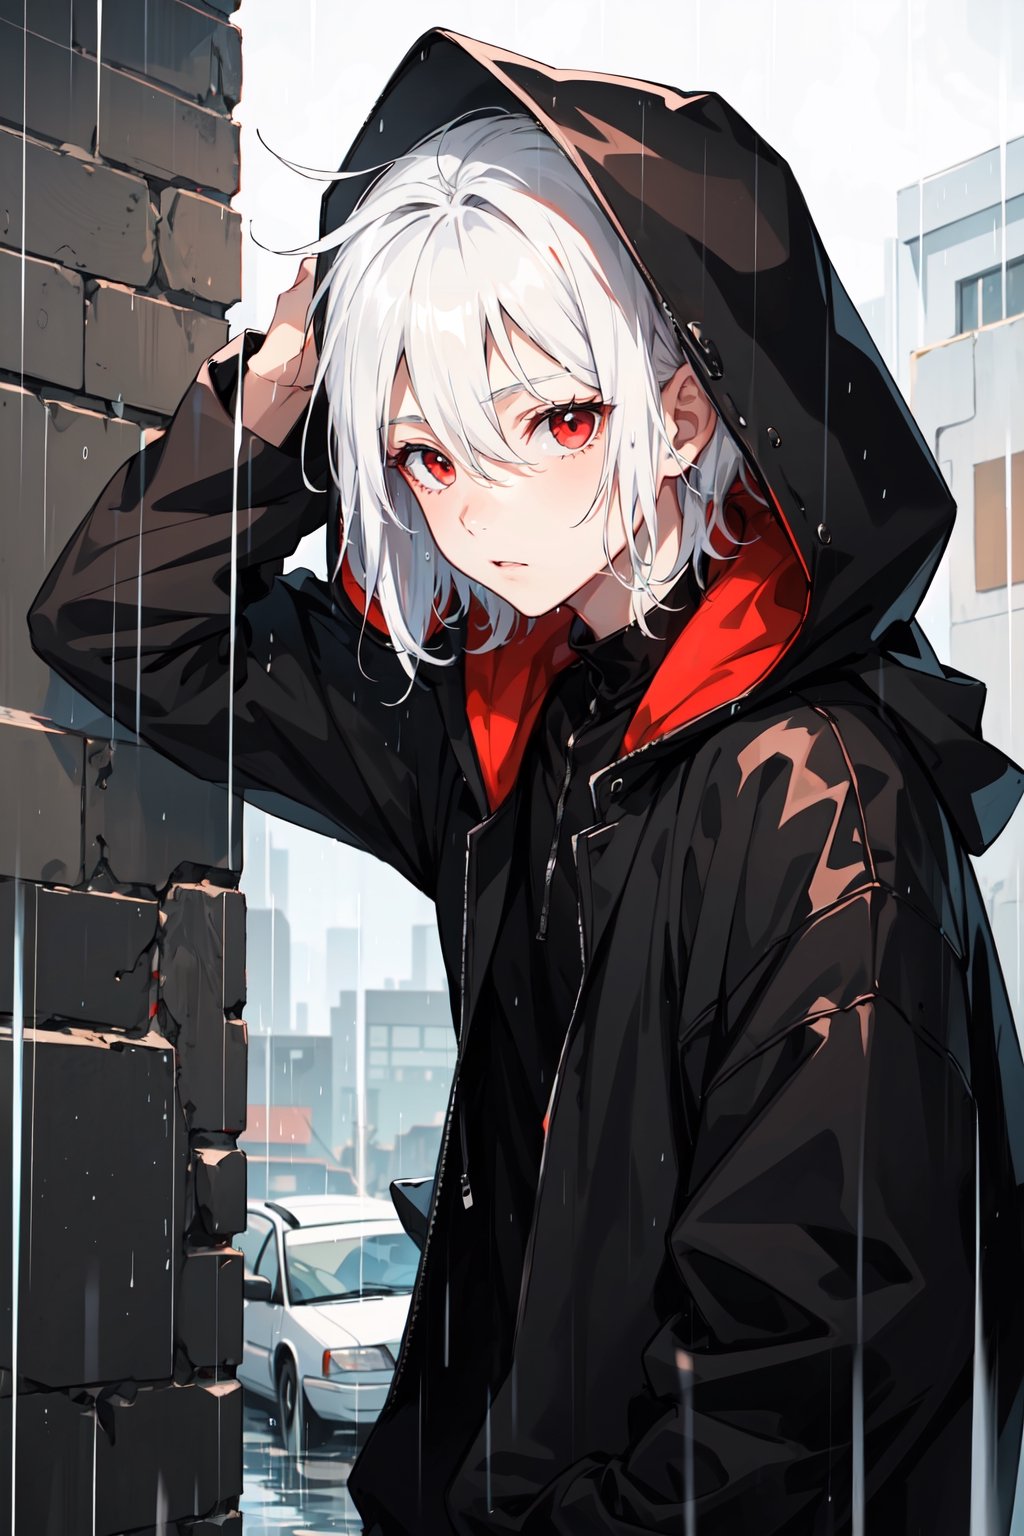 A boy with white hair wearing a hood and black clothes in the rain, highlighted by his red eyes.